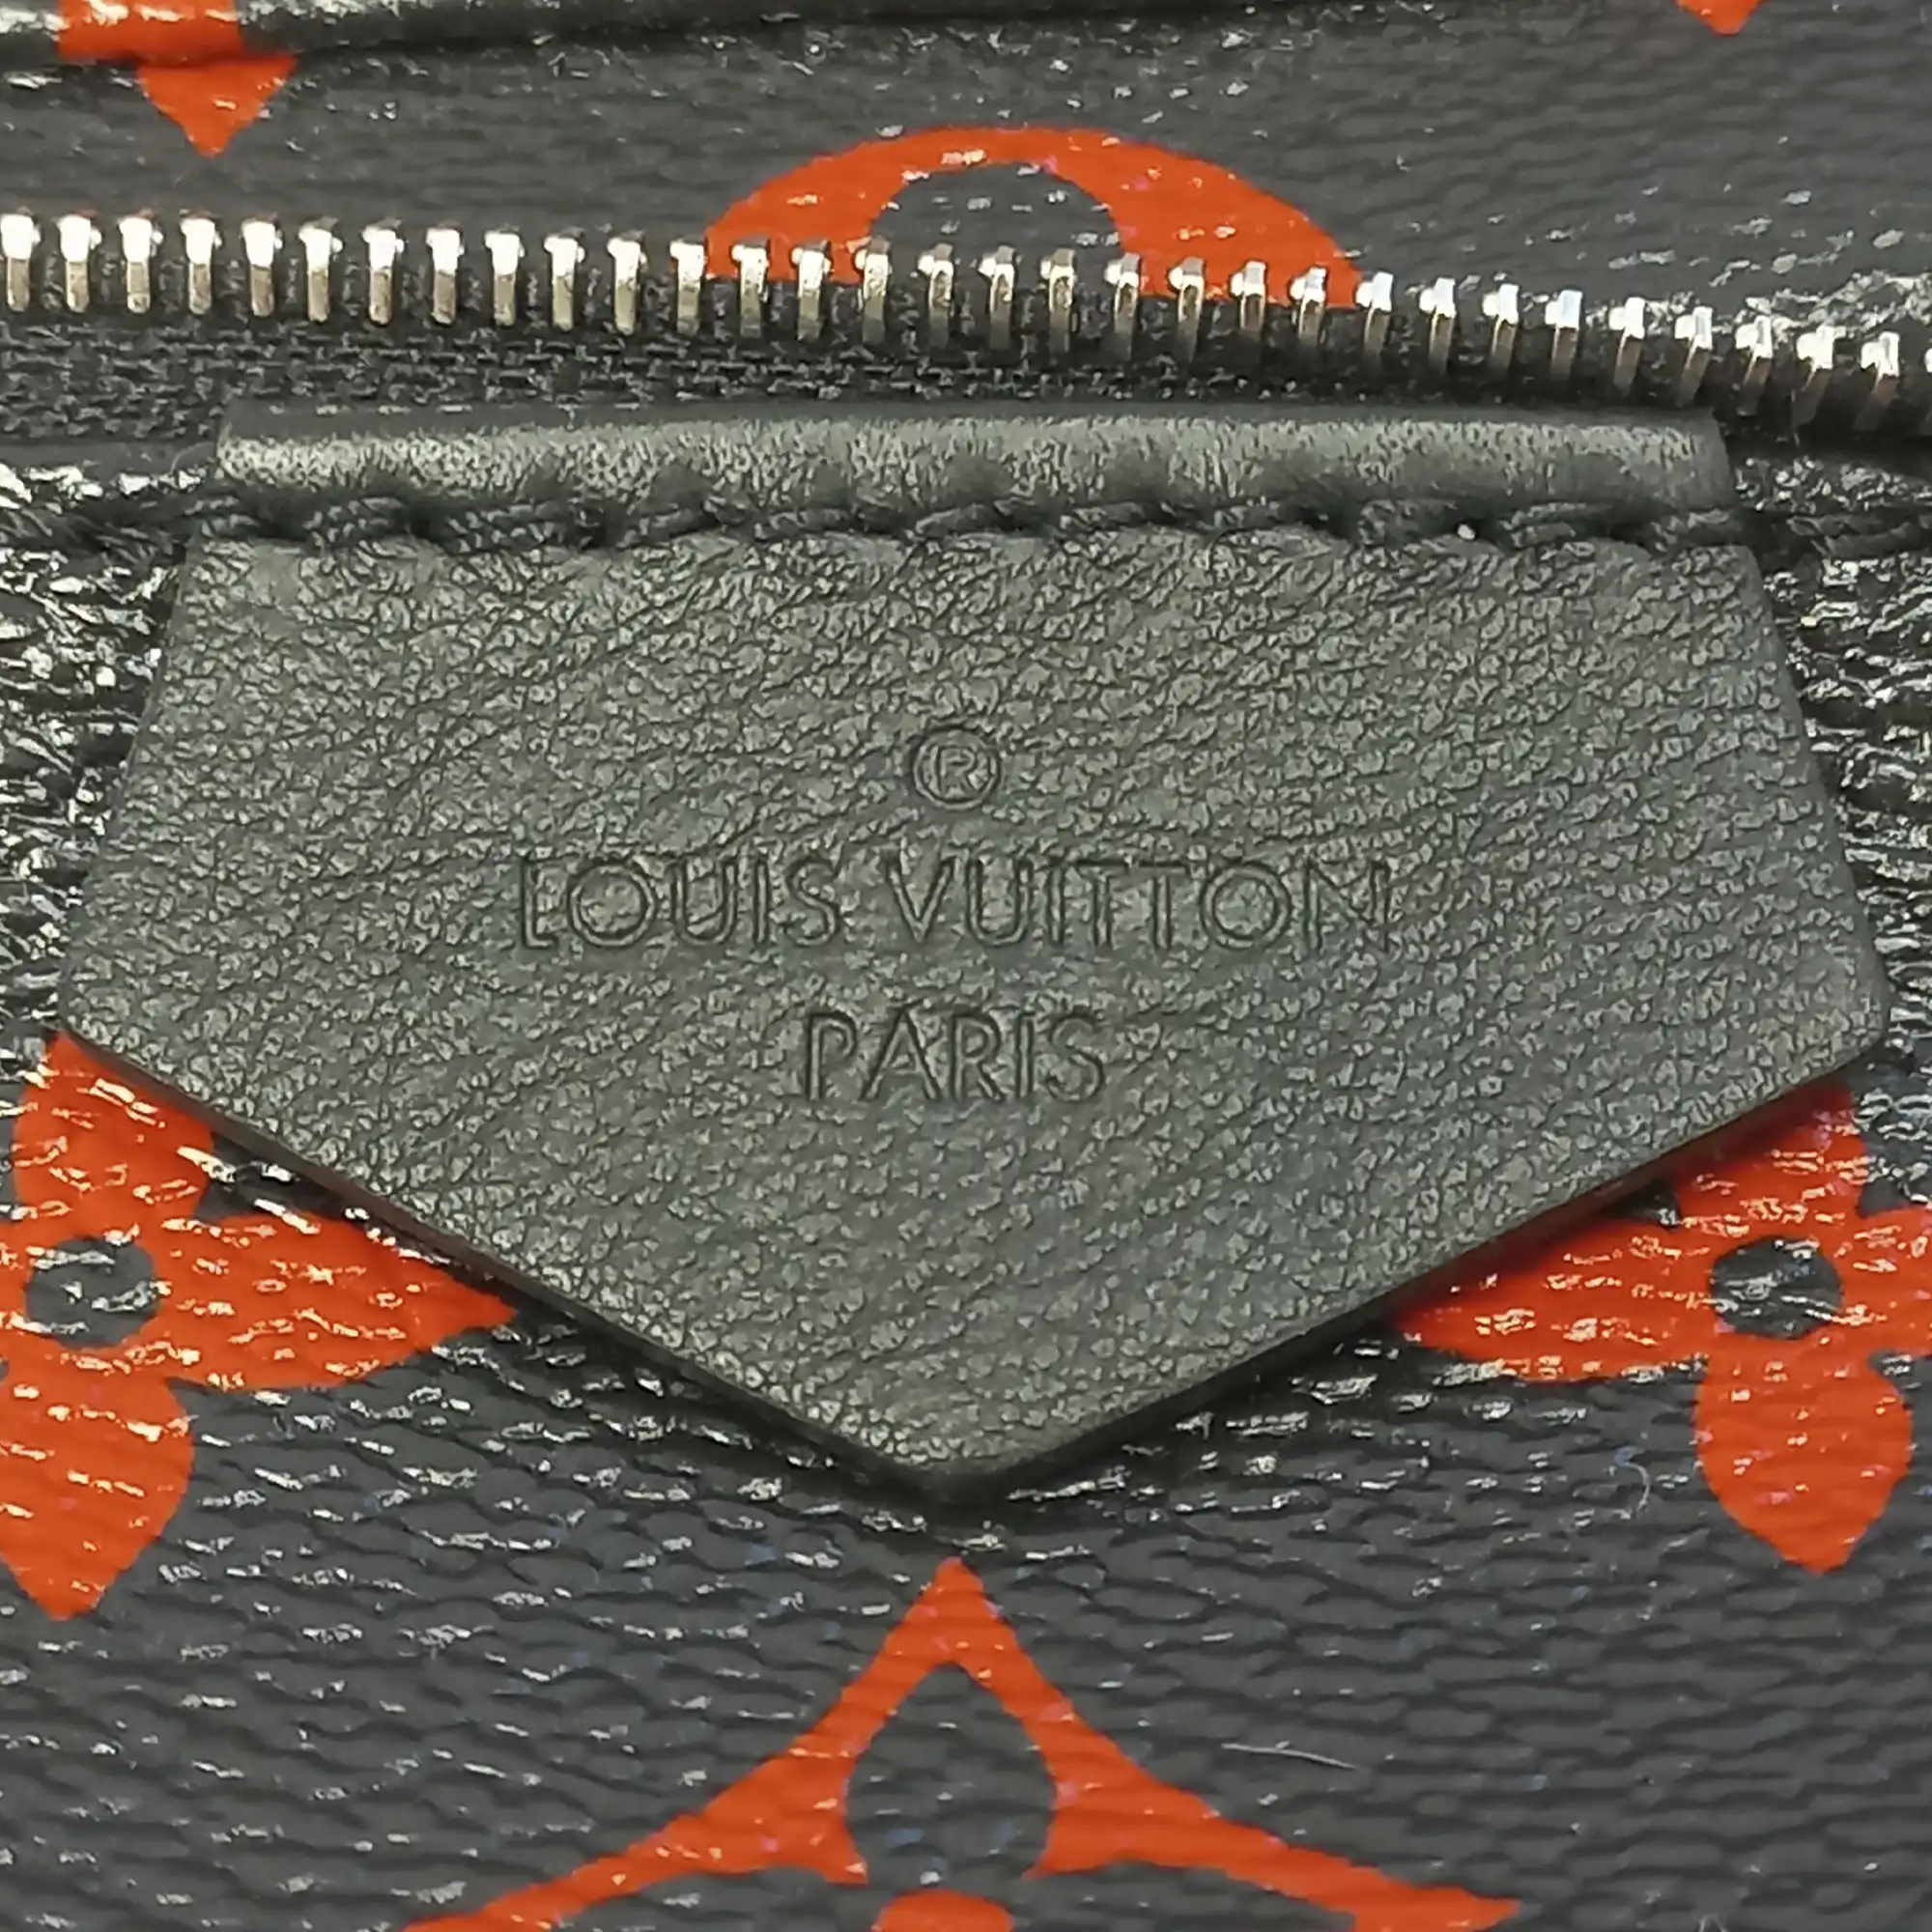 Louis Vuitton Palm Springs Limited Edition Monogram Infrarouge PM